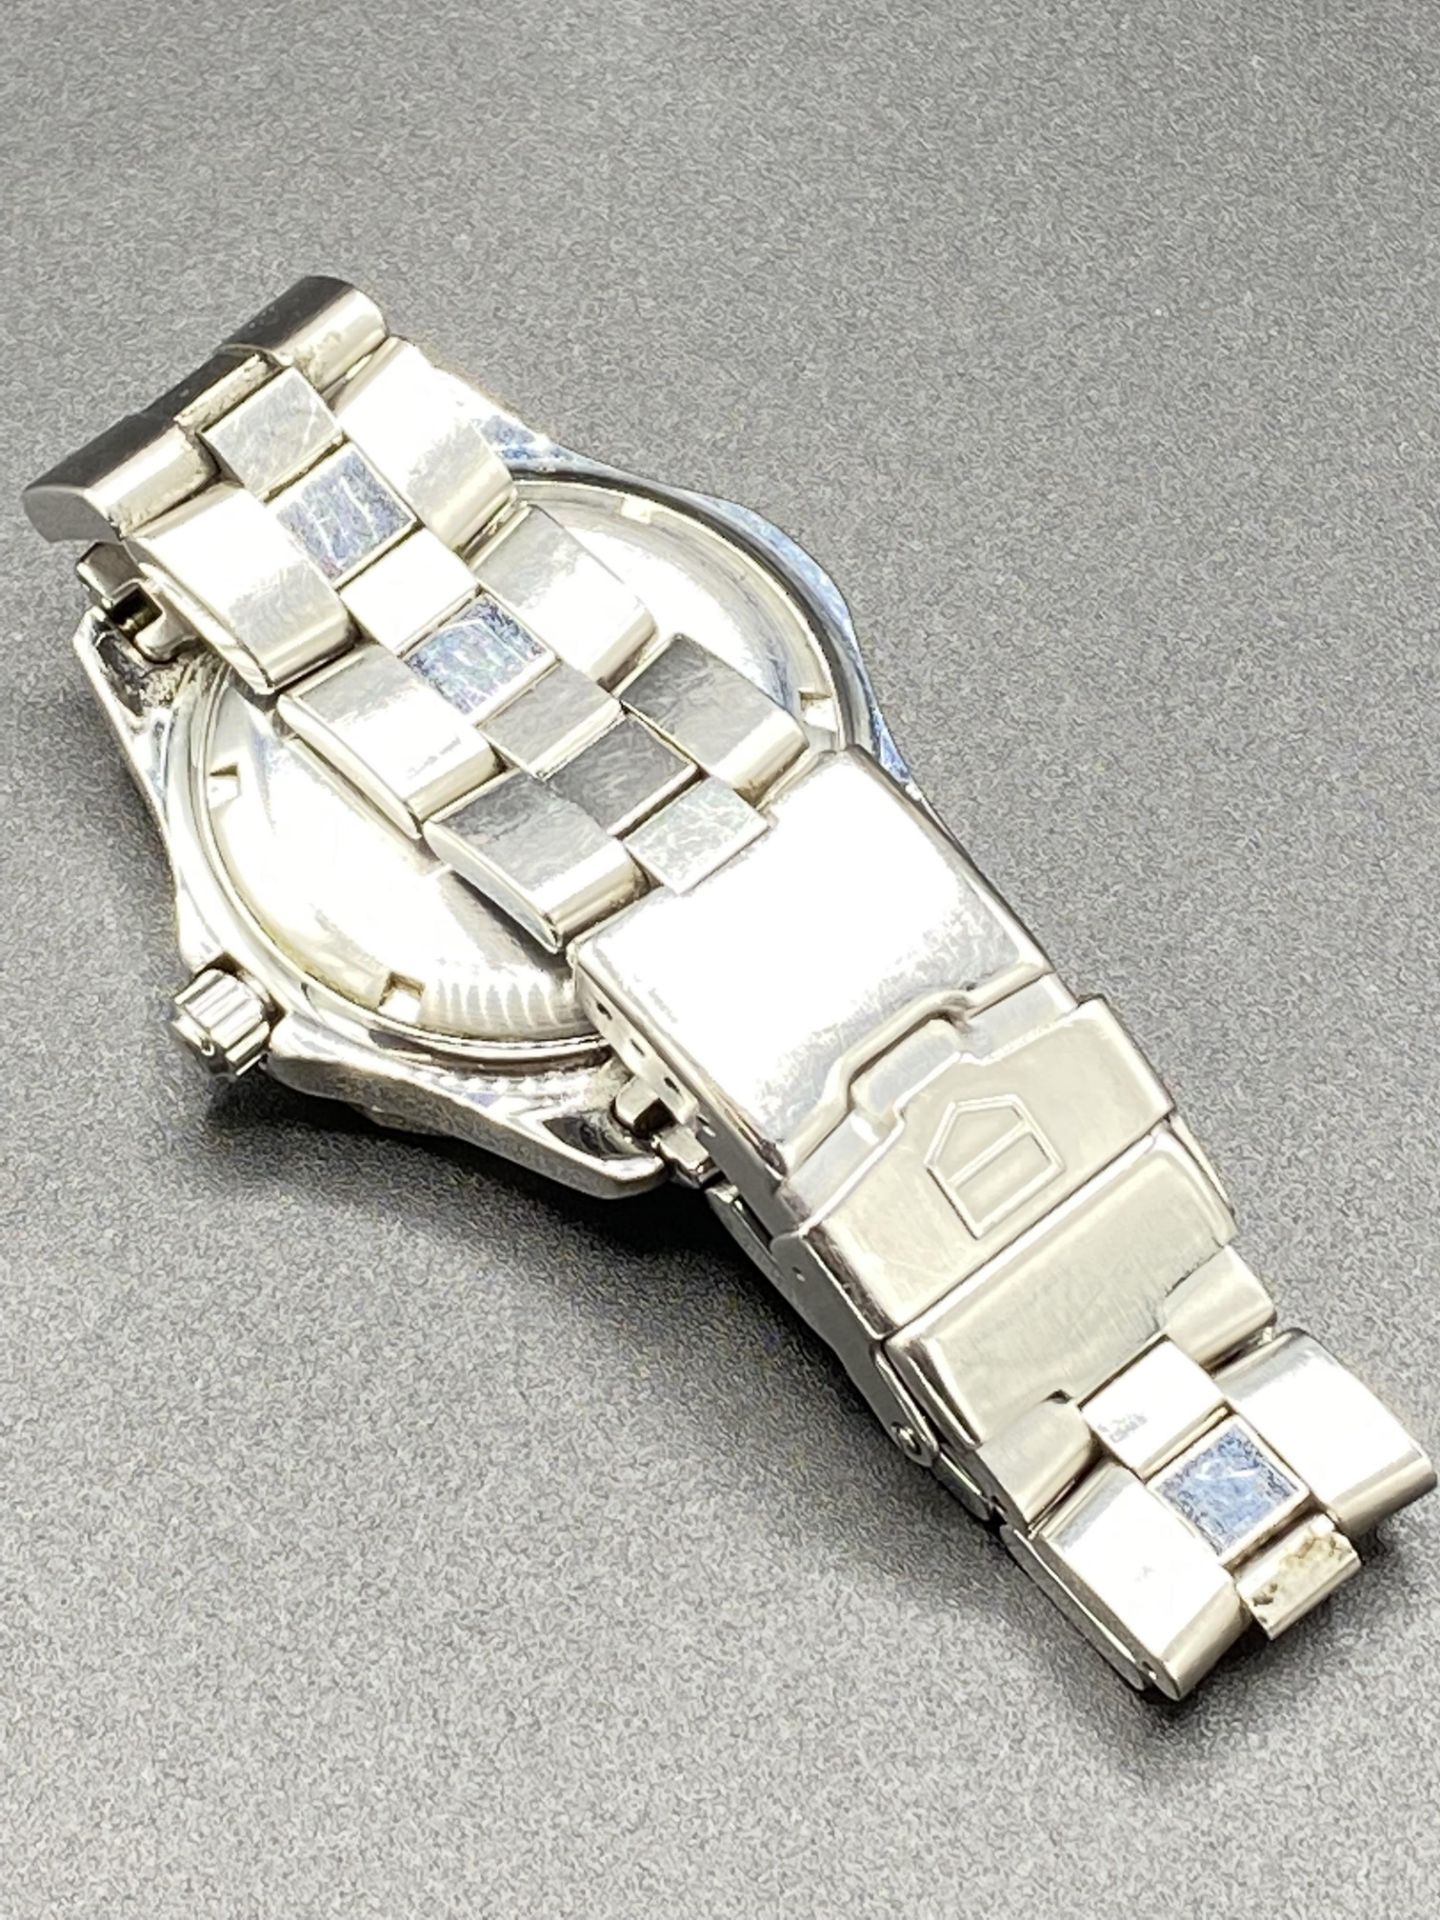 Tag Heuer stainless steel wrist watch - Image 5 of 7